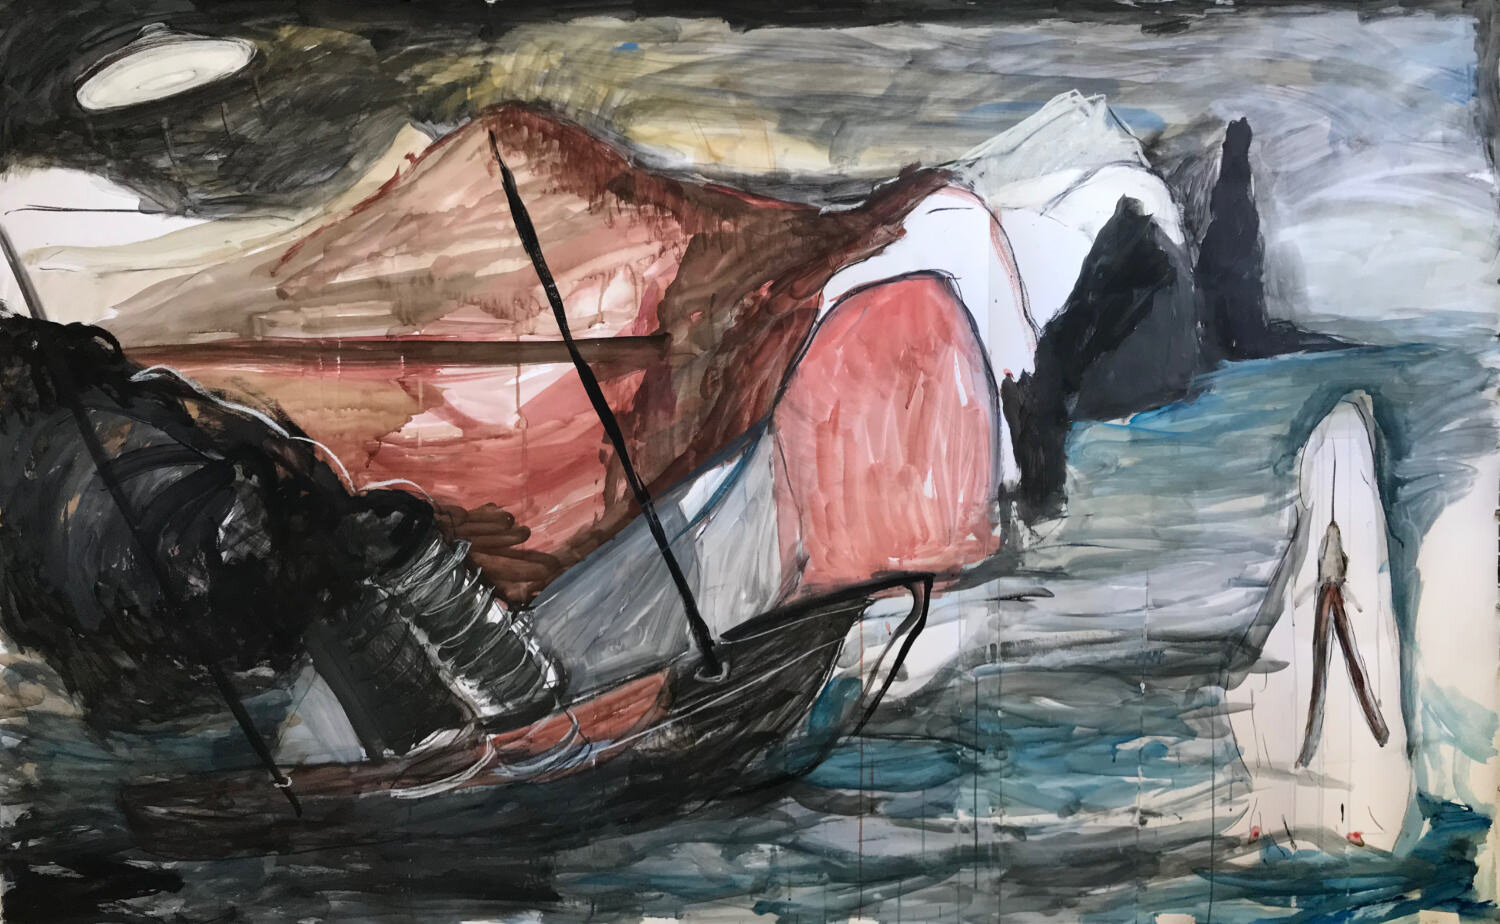 The coal boaters hope for better climate 150 x 241 cm 2020